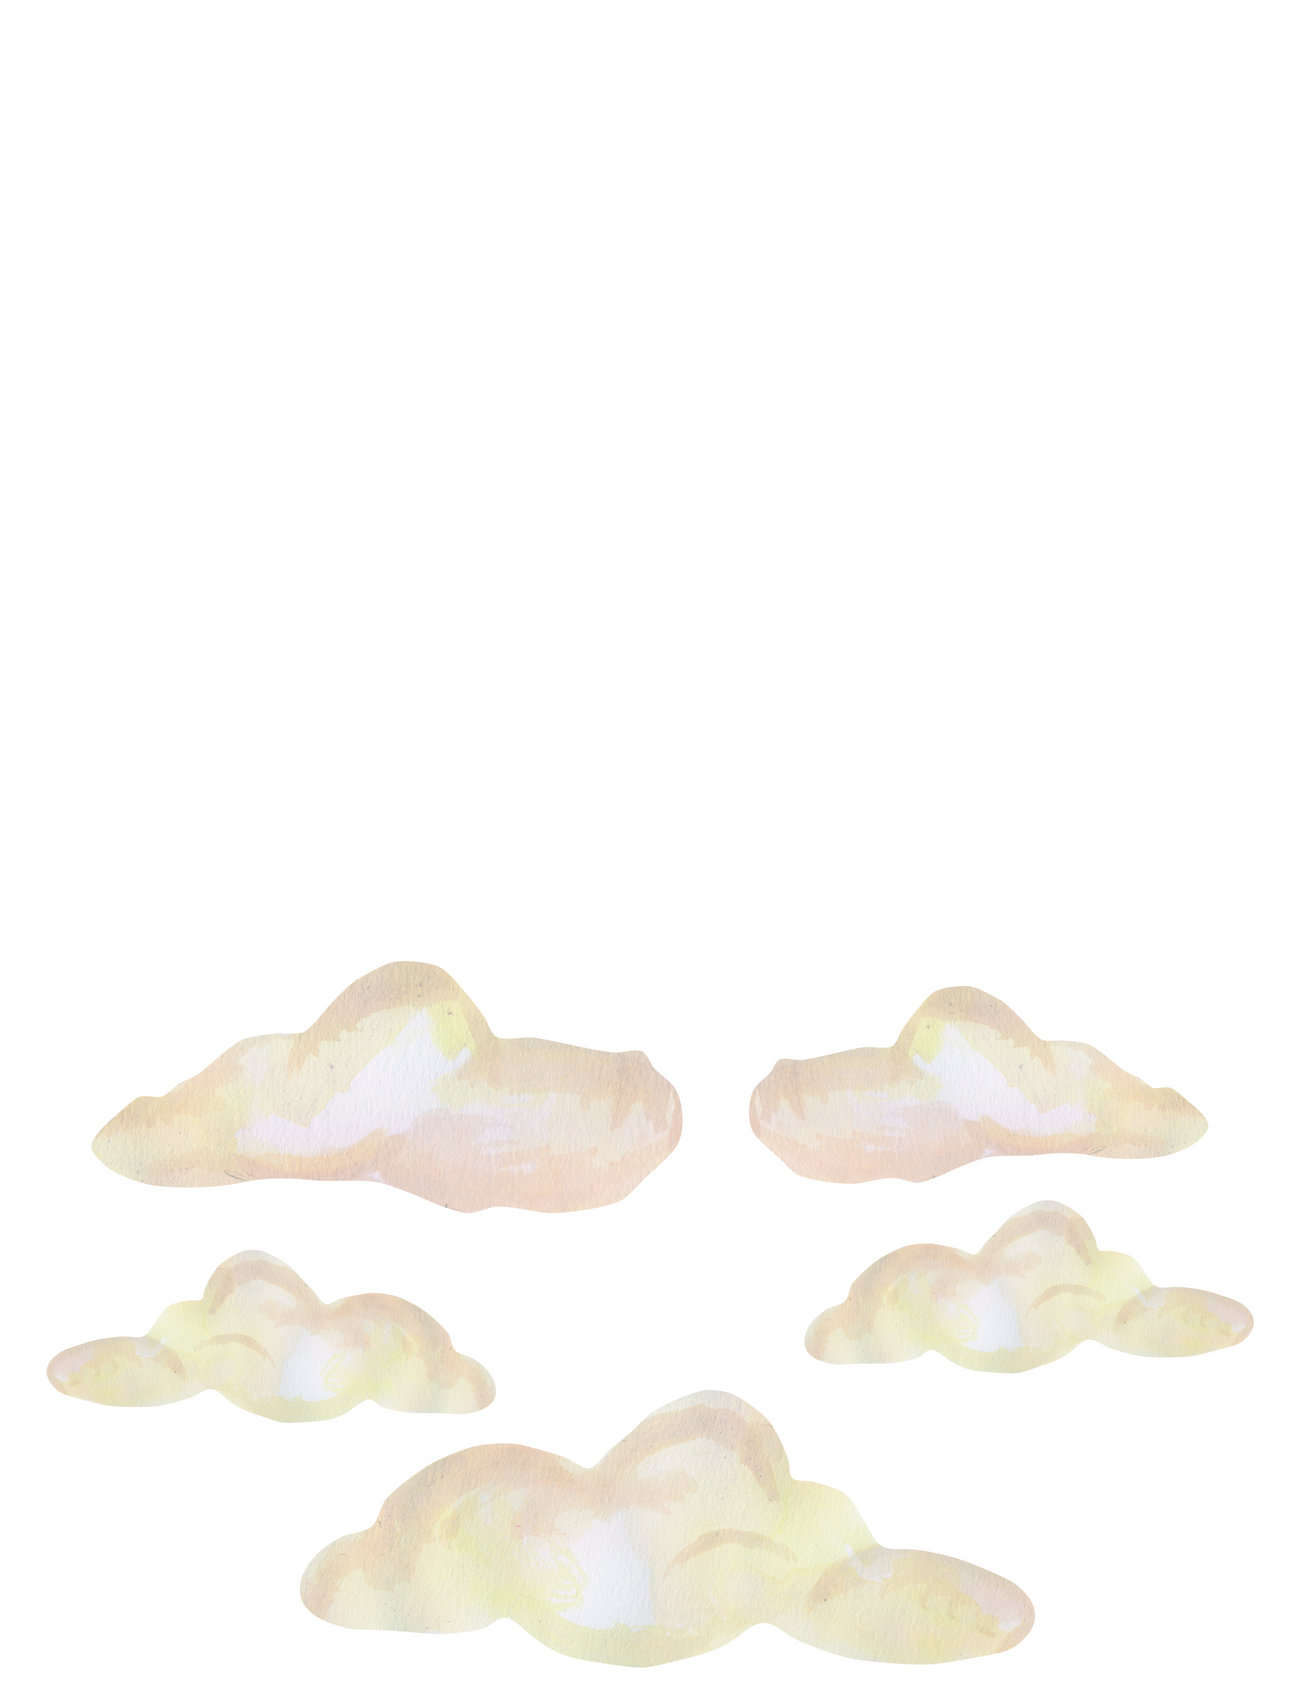 Wall Sticker Clouds 5 Pcs. Home Kids Decor Wall Stickers Nature Multi/patterned That's Mine